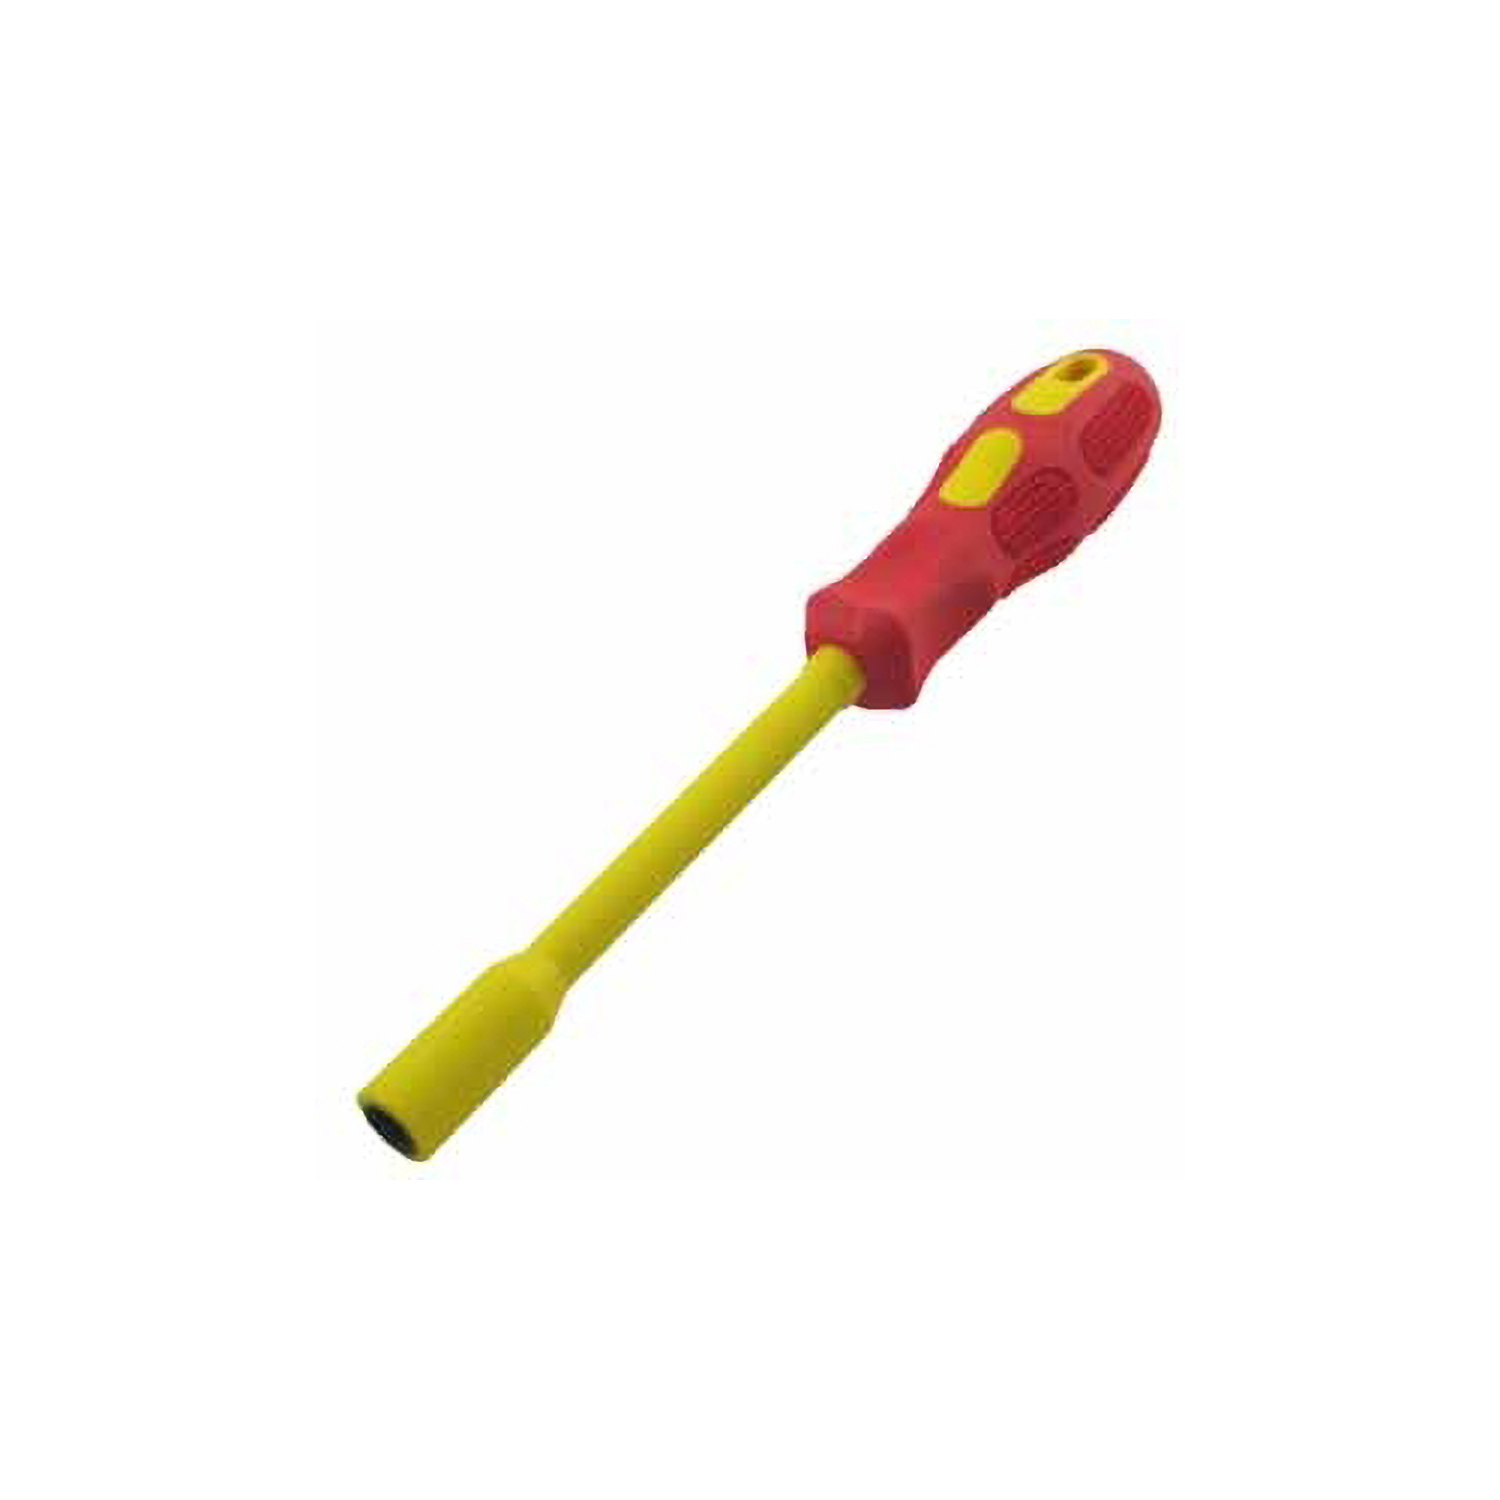 1/2" Insulated Nut Driver